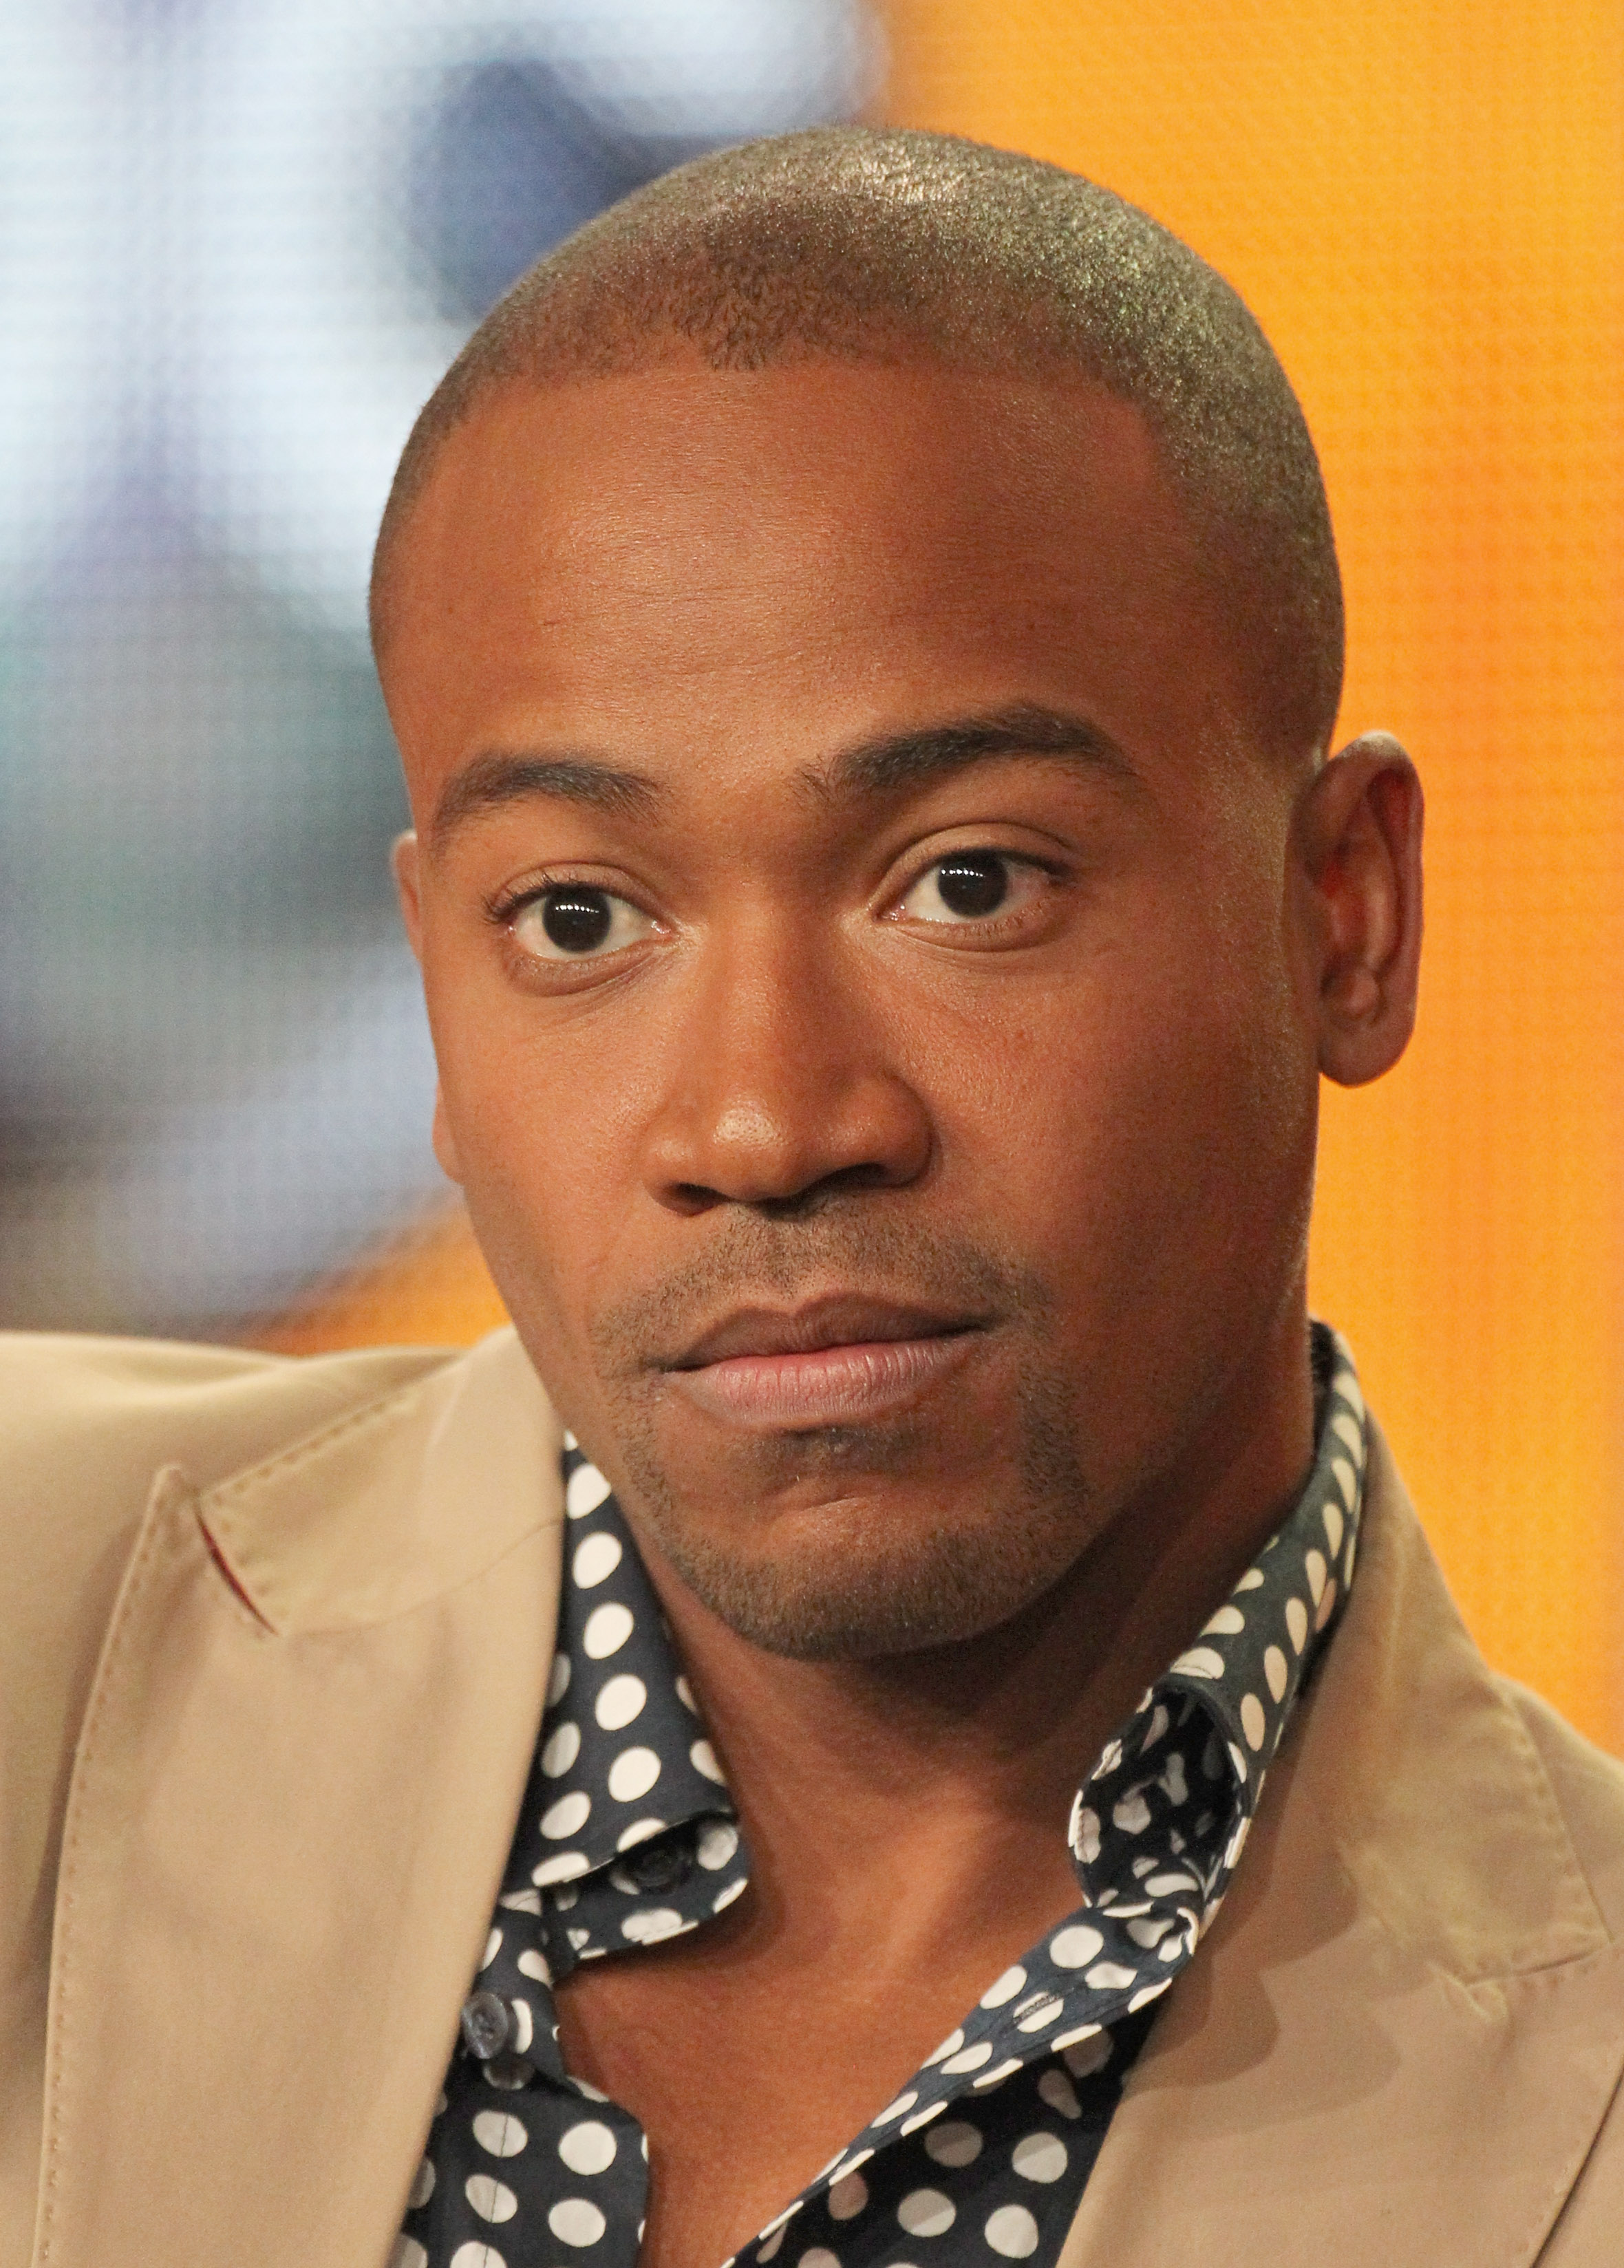 COLUMBUS SHORT OPENS UP ABOUT EVERYTHING!! Praise Cleveland